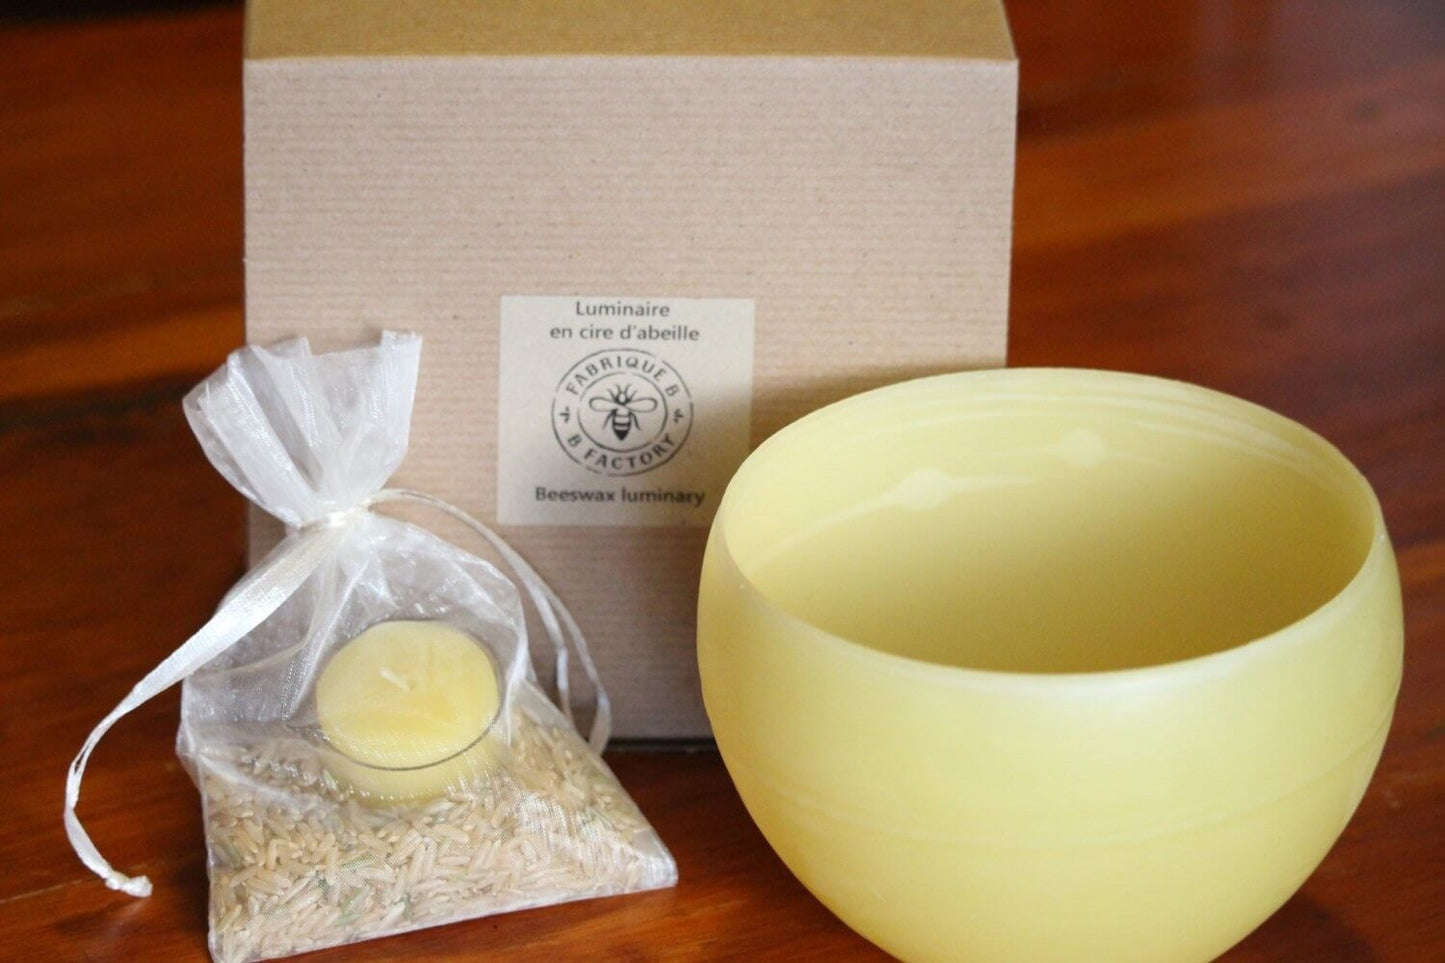 Beeswax luminary next to bag of brown rice, beeswax tea light candle in glass cup, and gift box with B Factory logo